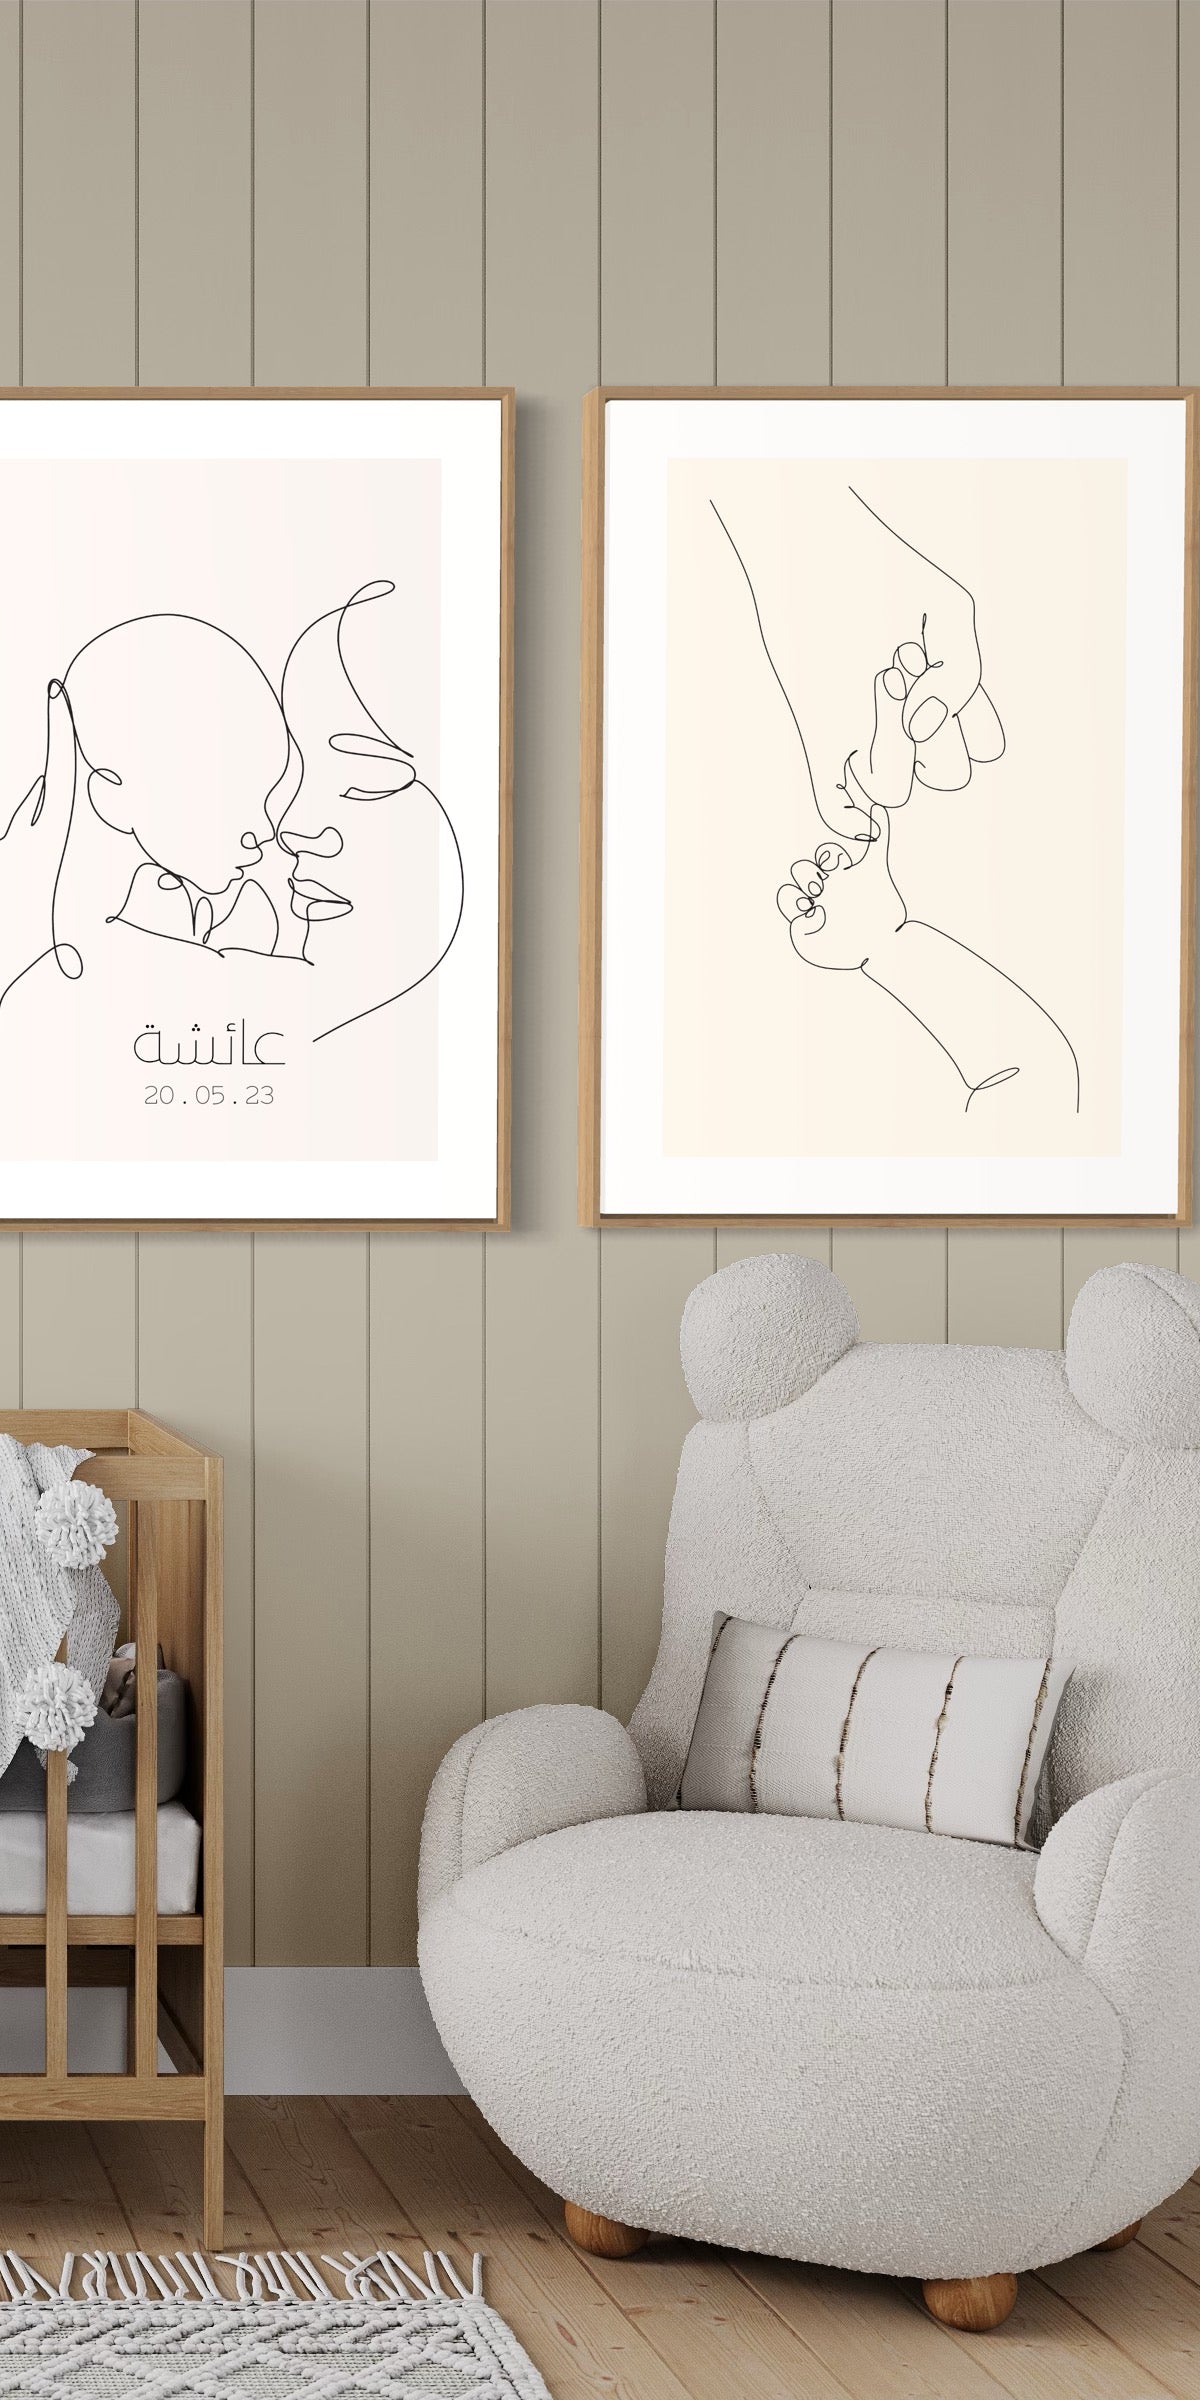 Tender Embrace: Line Art Print of Hand Holding Baby's Hand - Symbol of Unbreakable Love